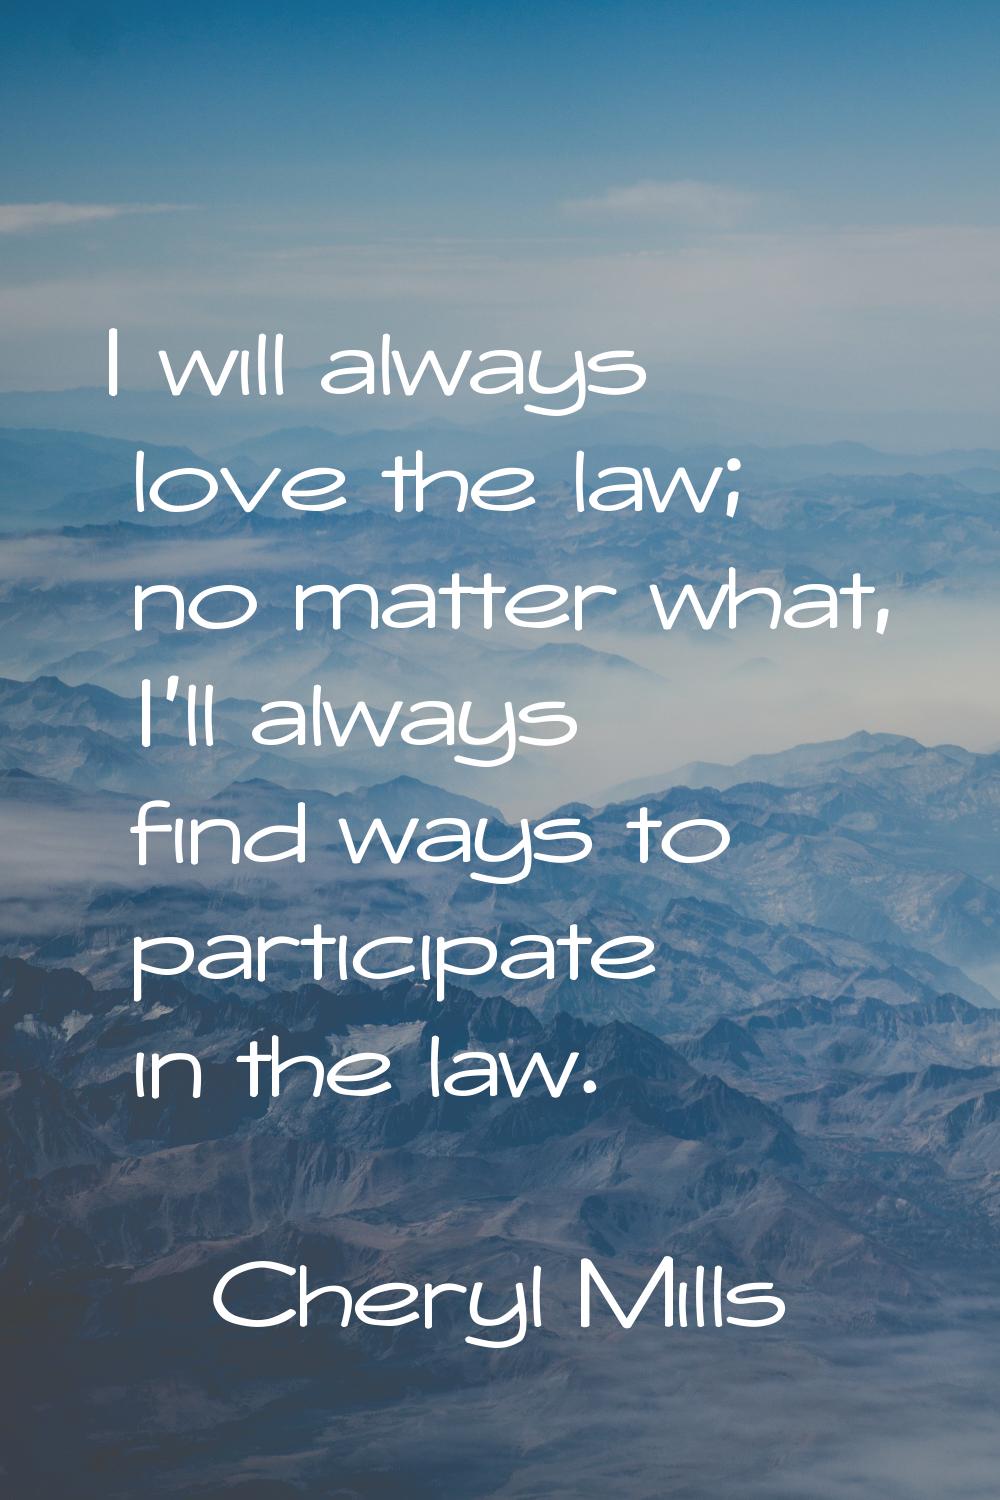 I will always love the law; no matter what, I'll always find ways to participate in the law.